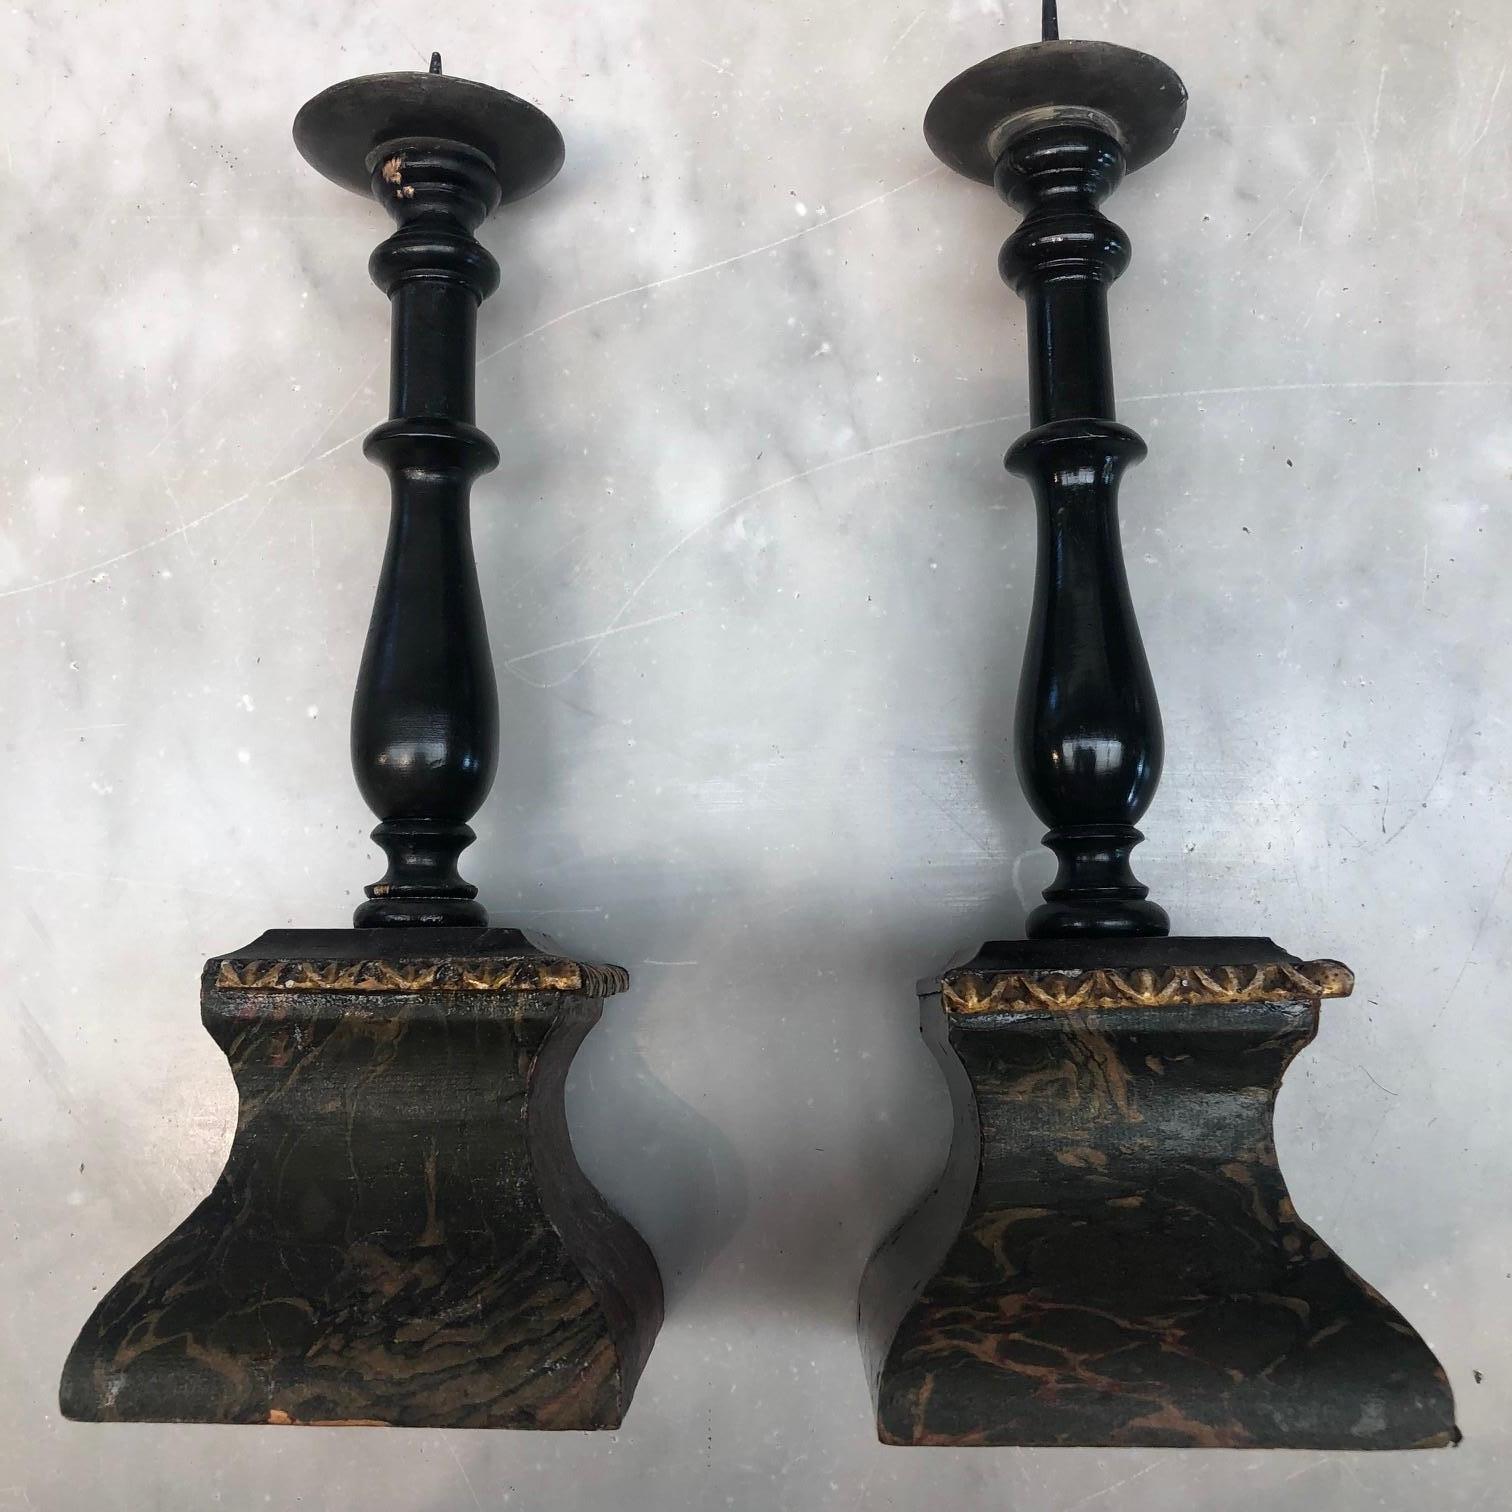 Pair of charming Danish Baroque candlesticks in wood with ebonized light stems, marble bases and pewter bobeches,
Denmark, circa 1750-1780.